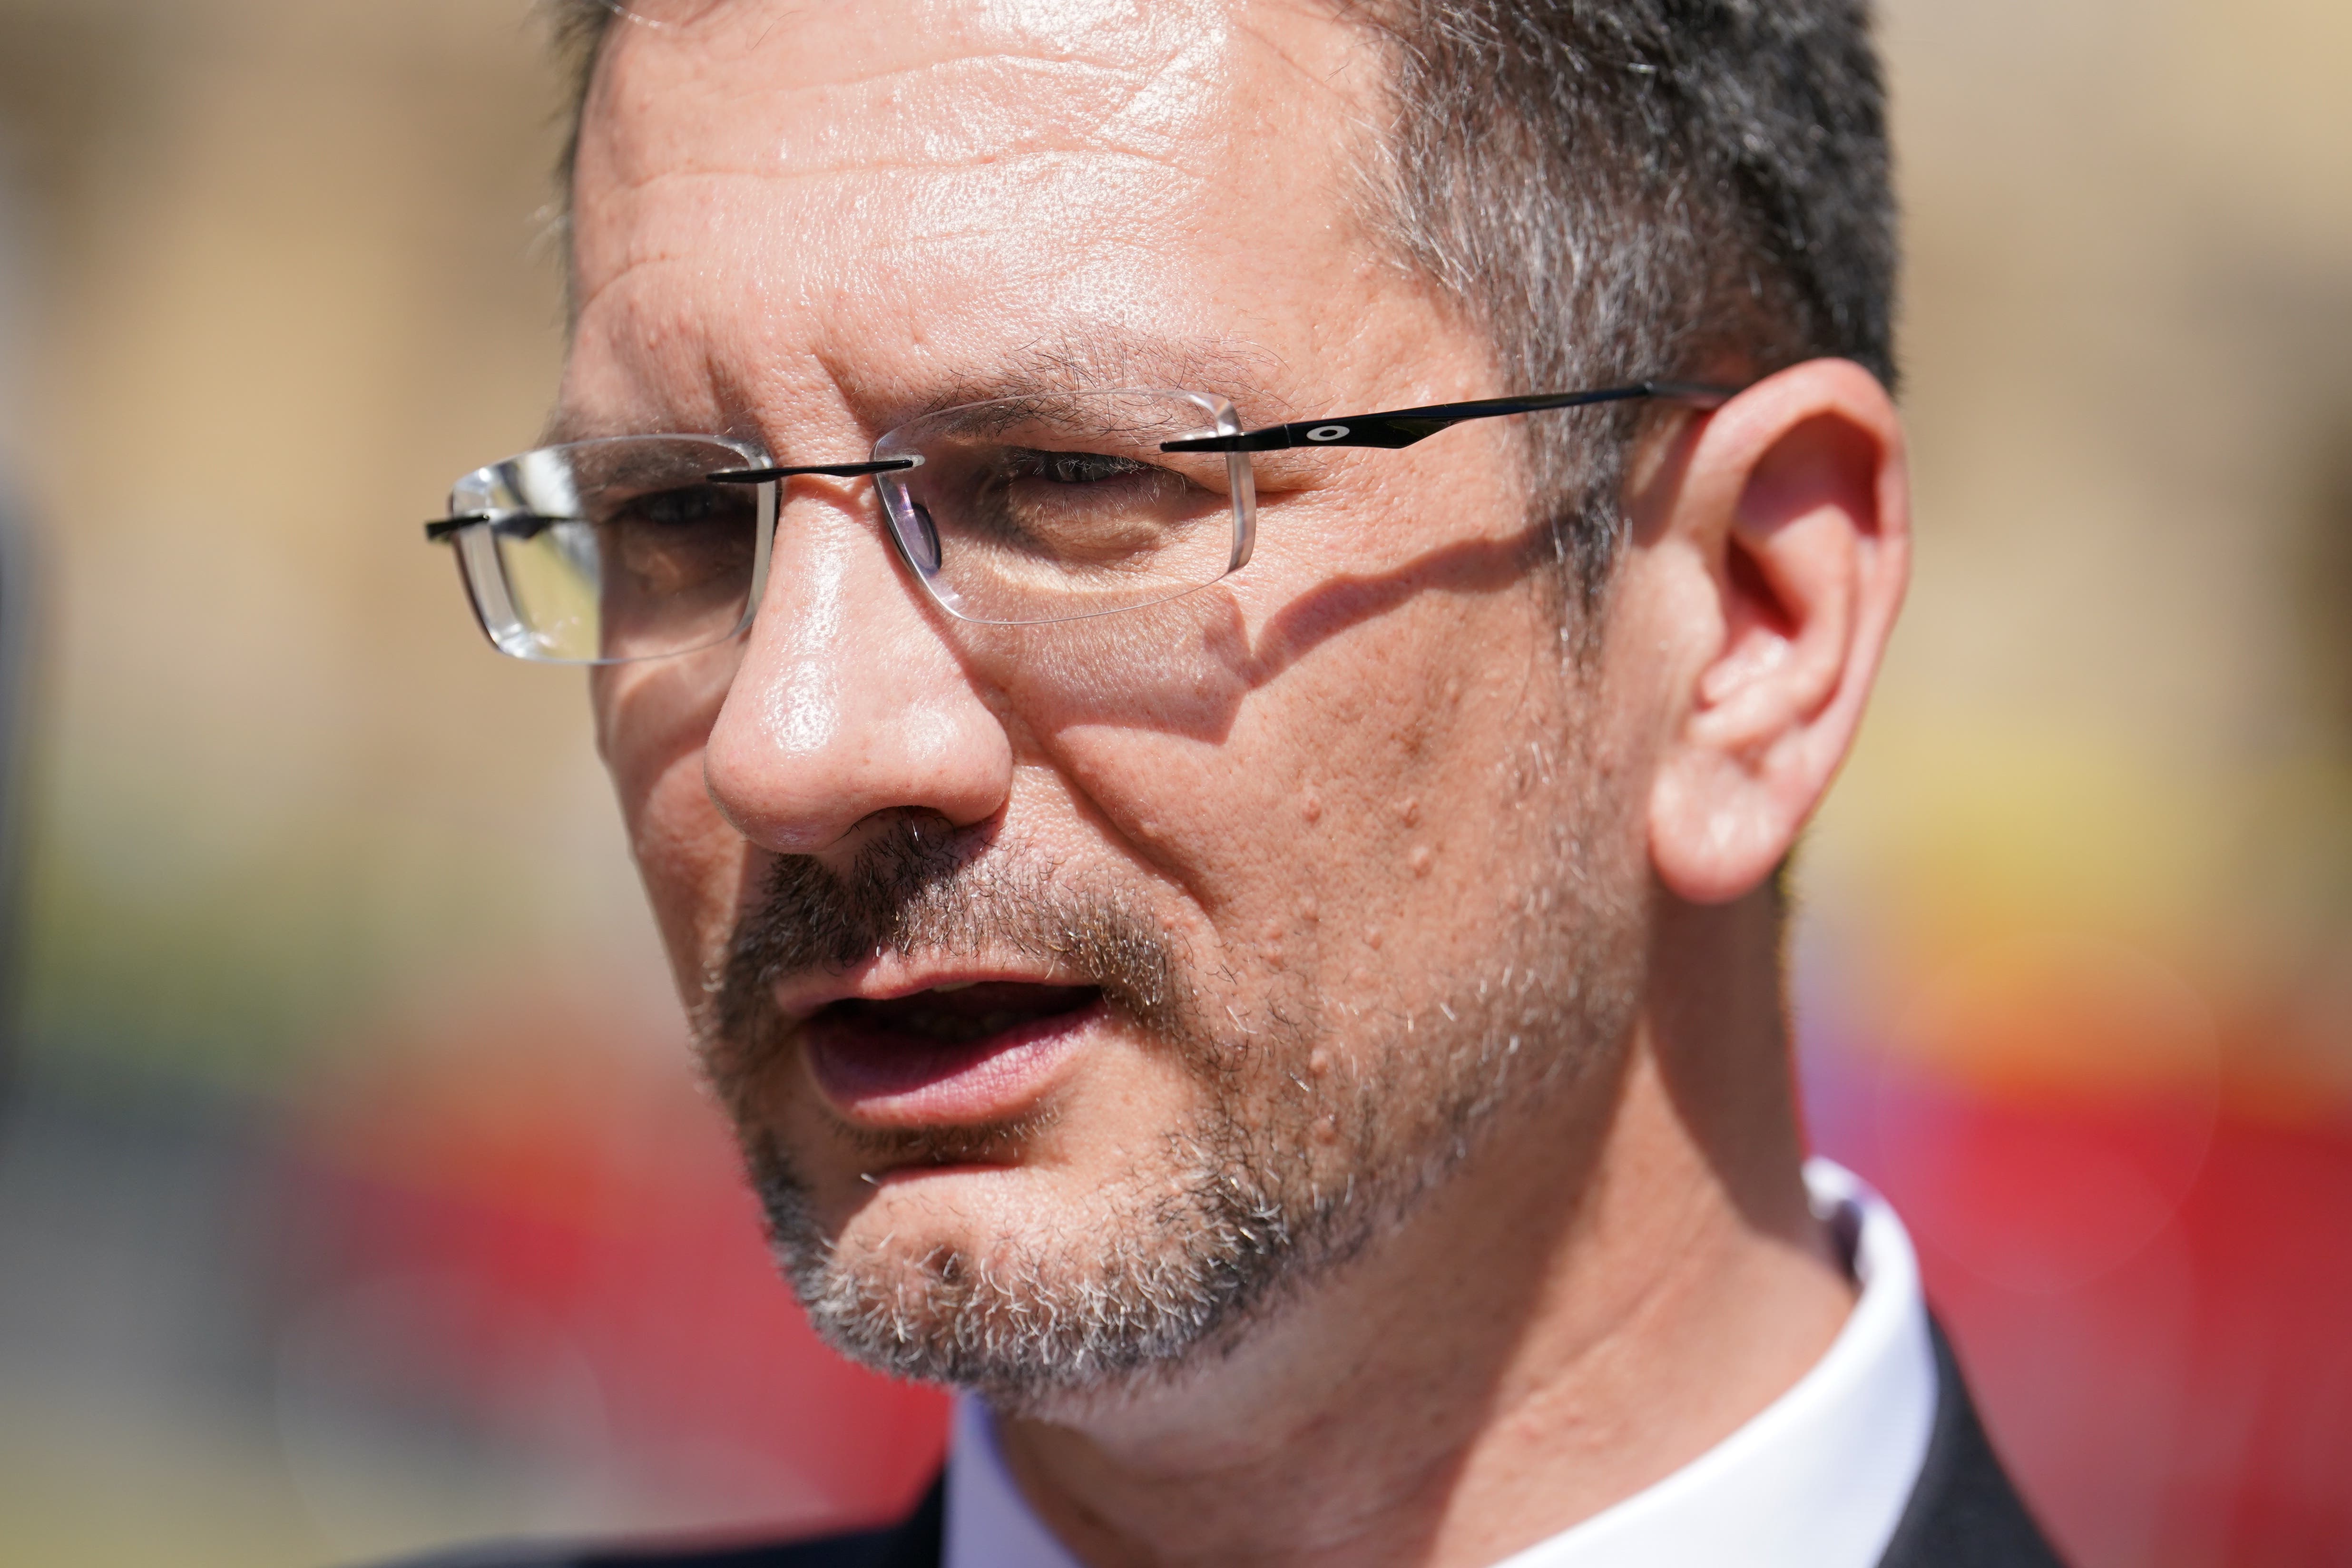 Steve Baker (pictured) thanked the journalist for apologising